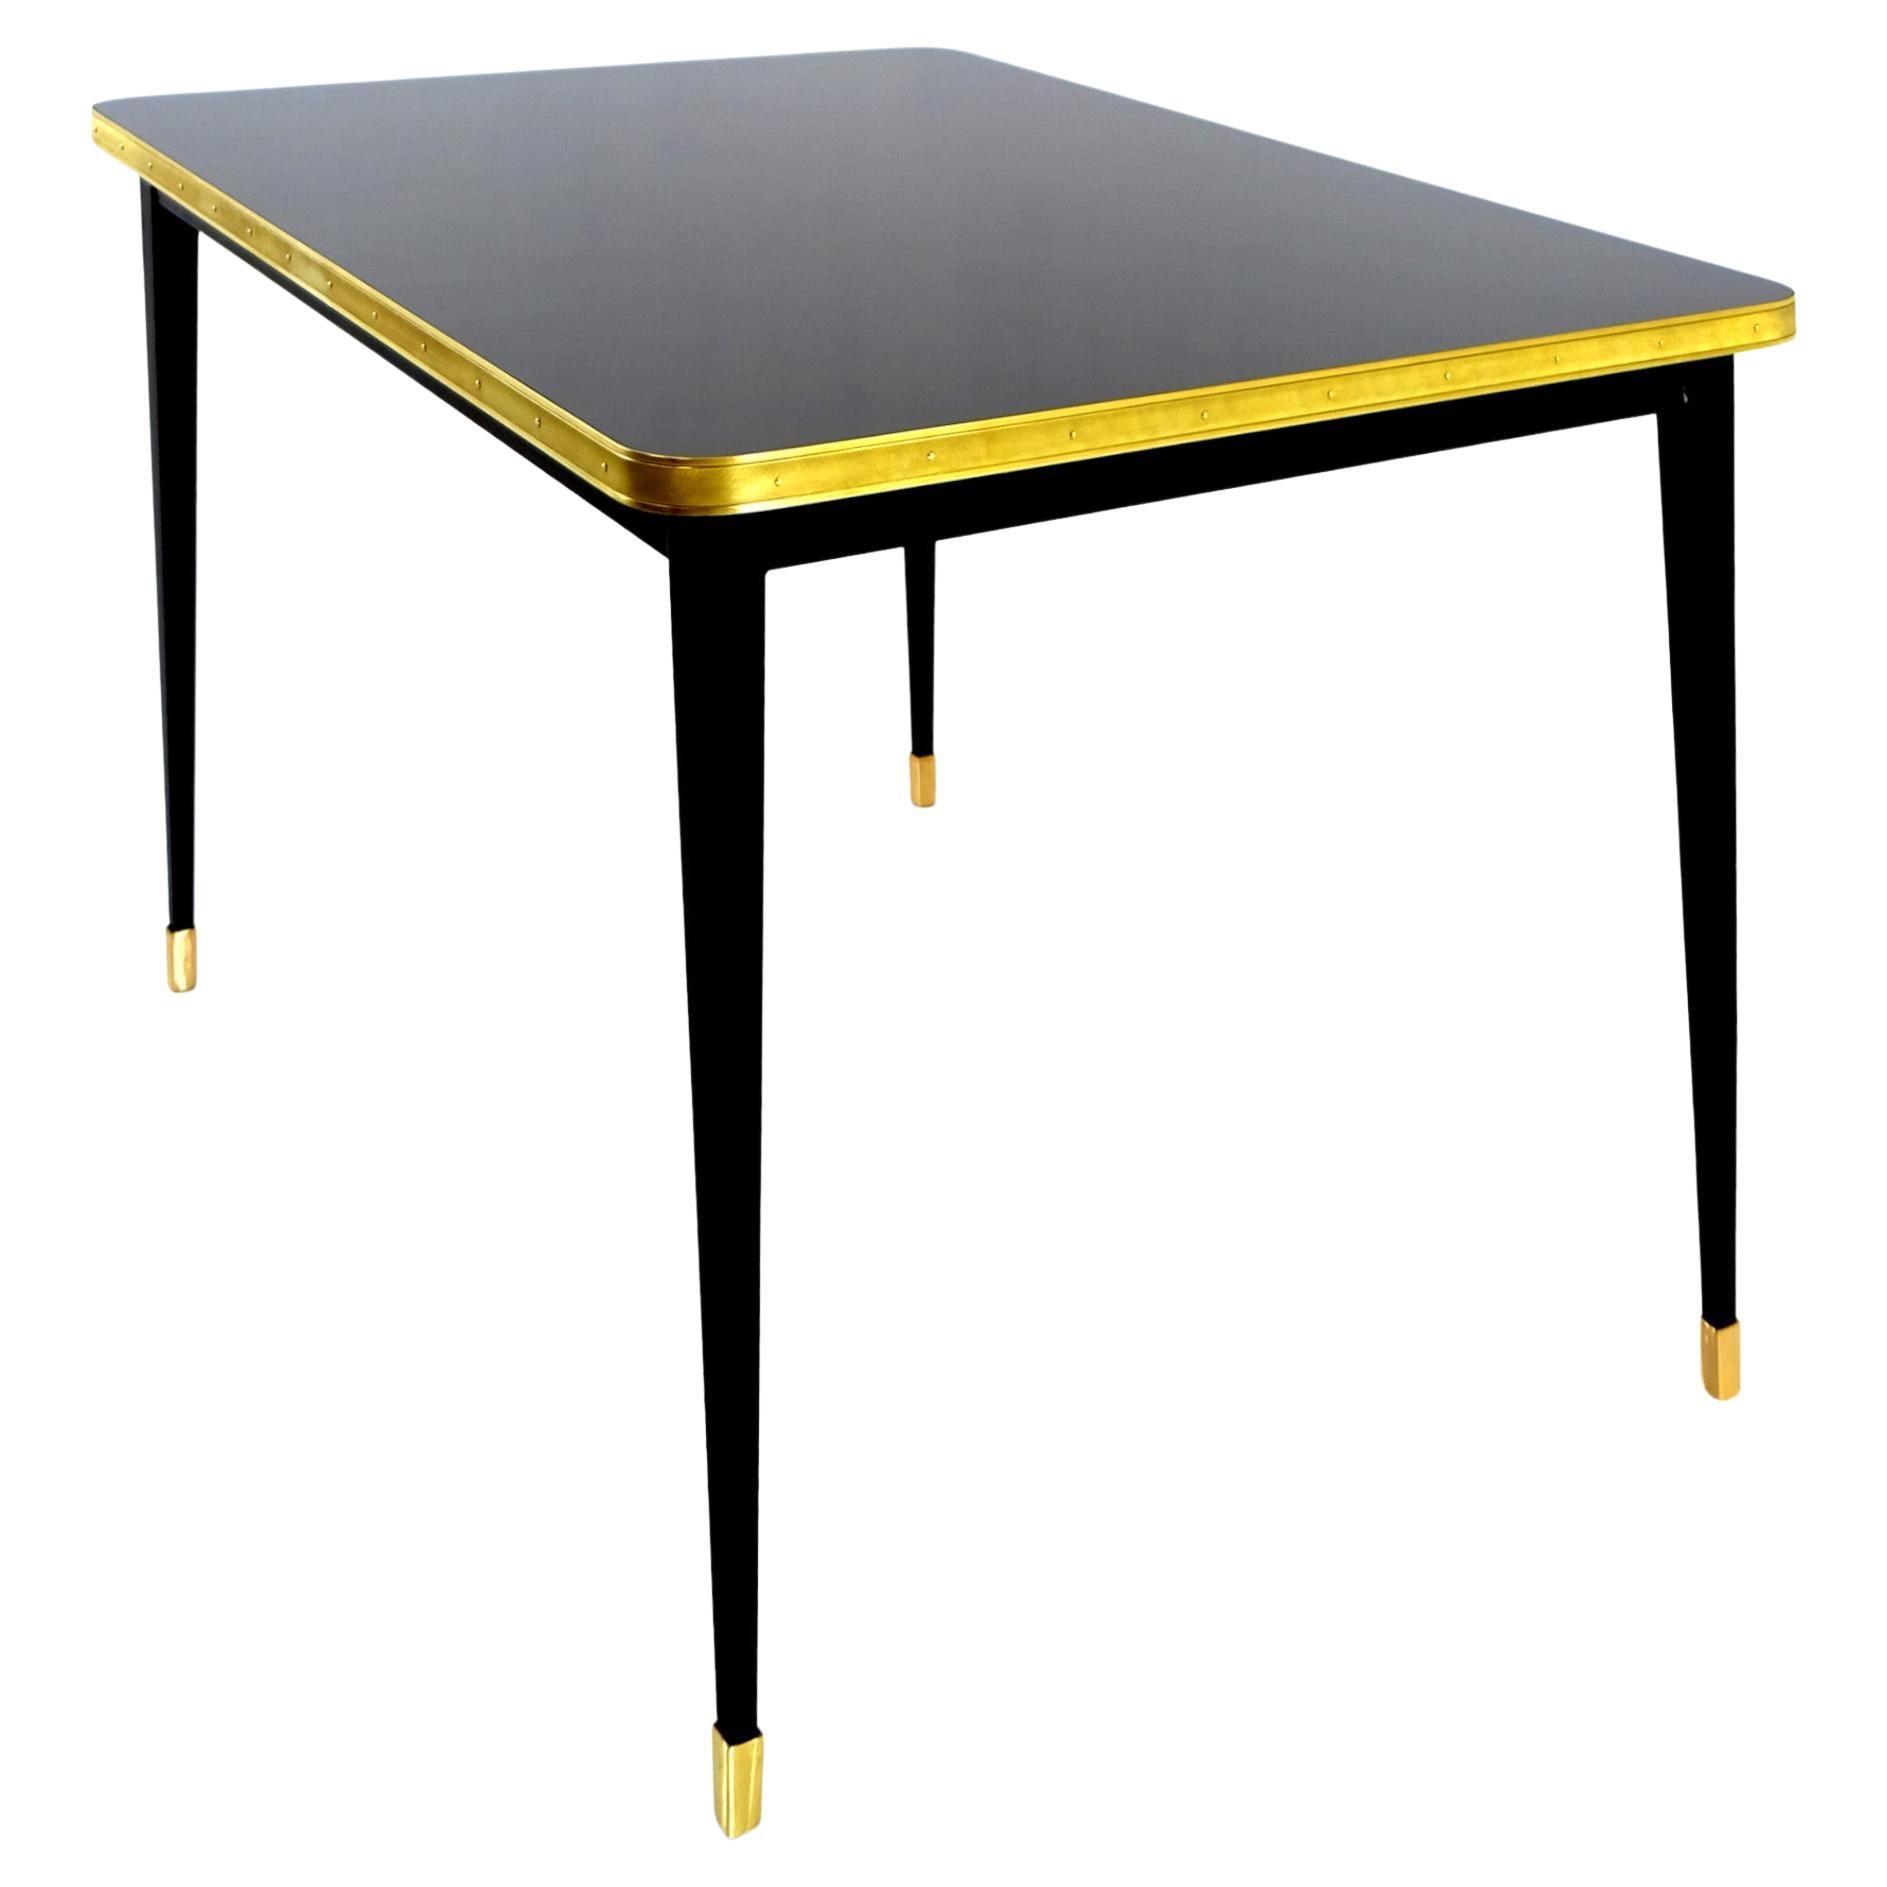 Julieta Collection. 

Table with Black Steel Conical Legs with Brass Bottom End Table Top on High Gloss Laminate Brass Tape Frame

Introducing the stunning dining room table with black powder-coated steel construction, boasting sleek conical legs